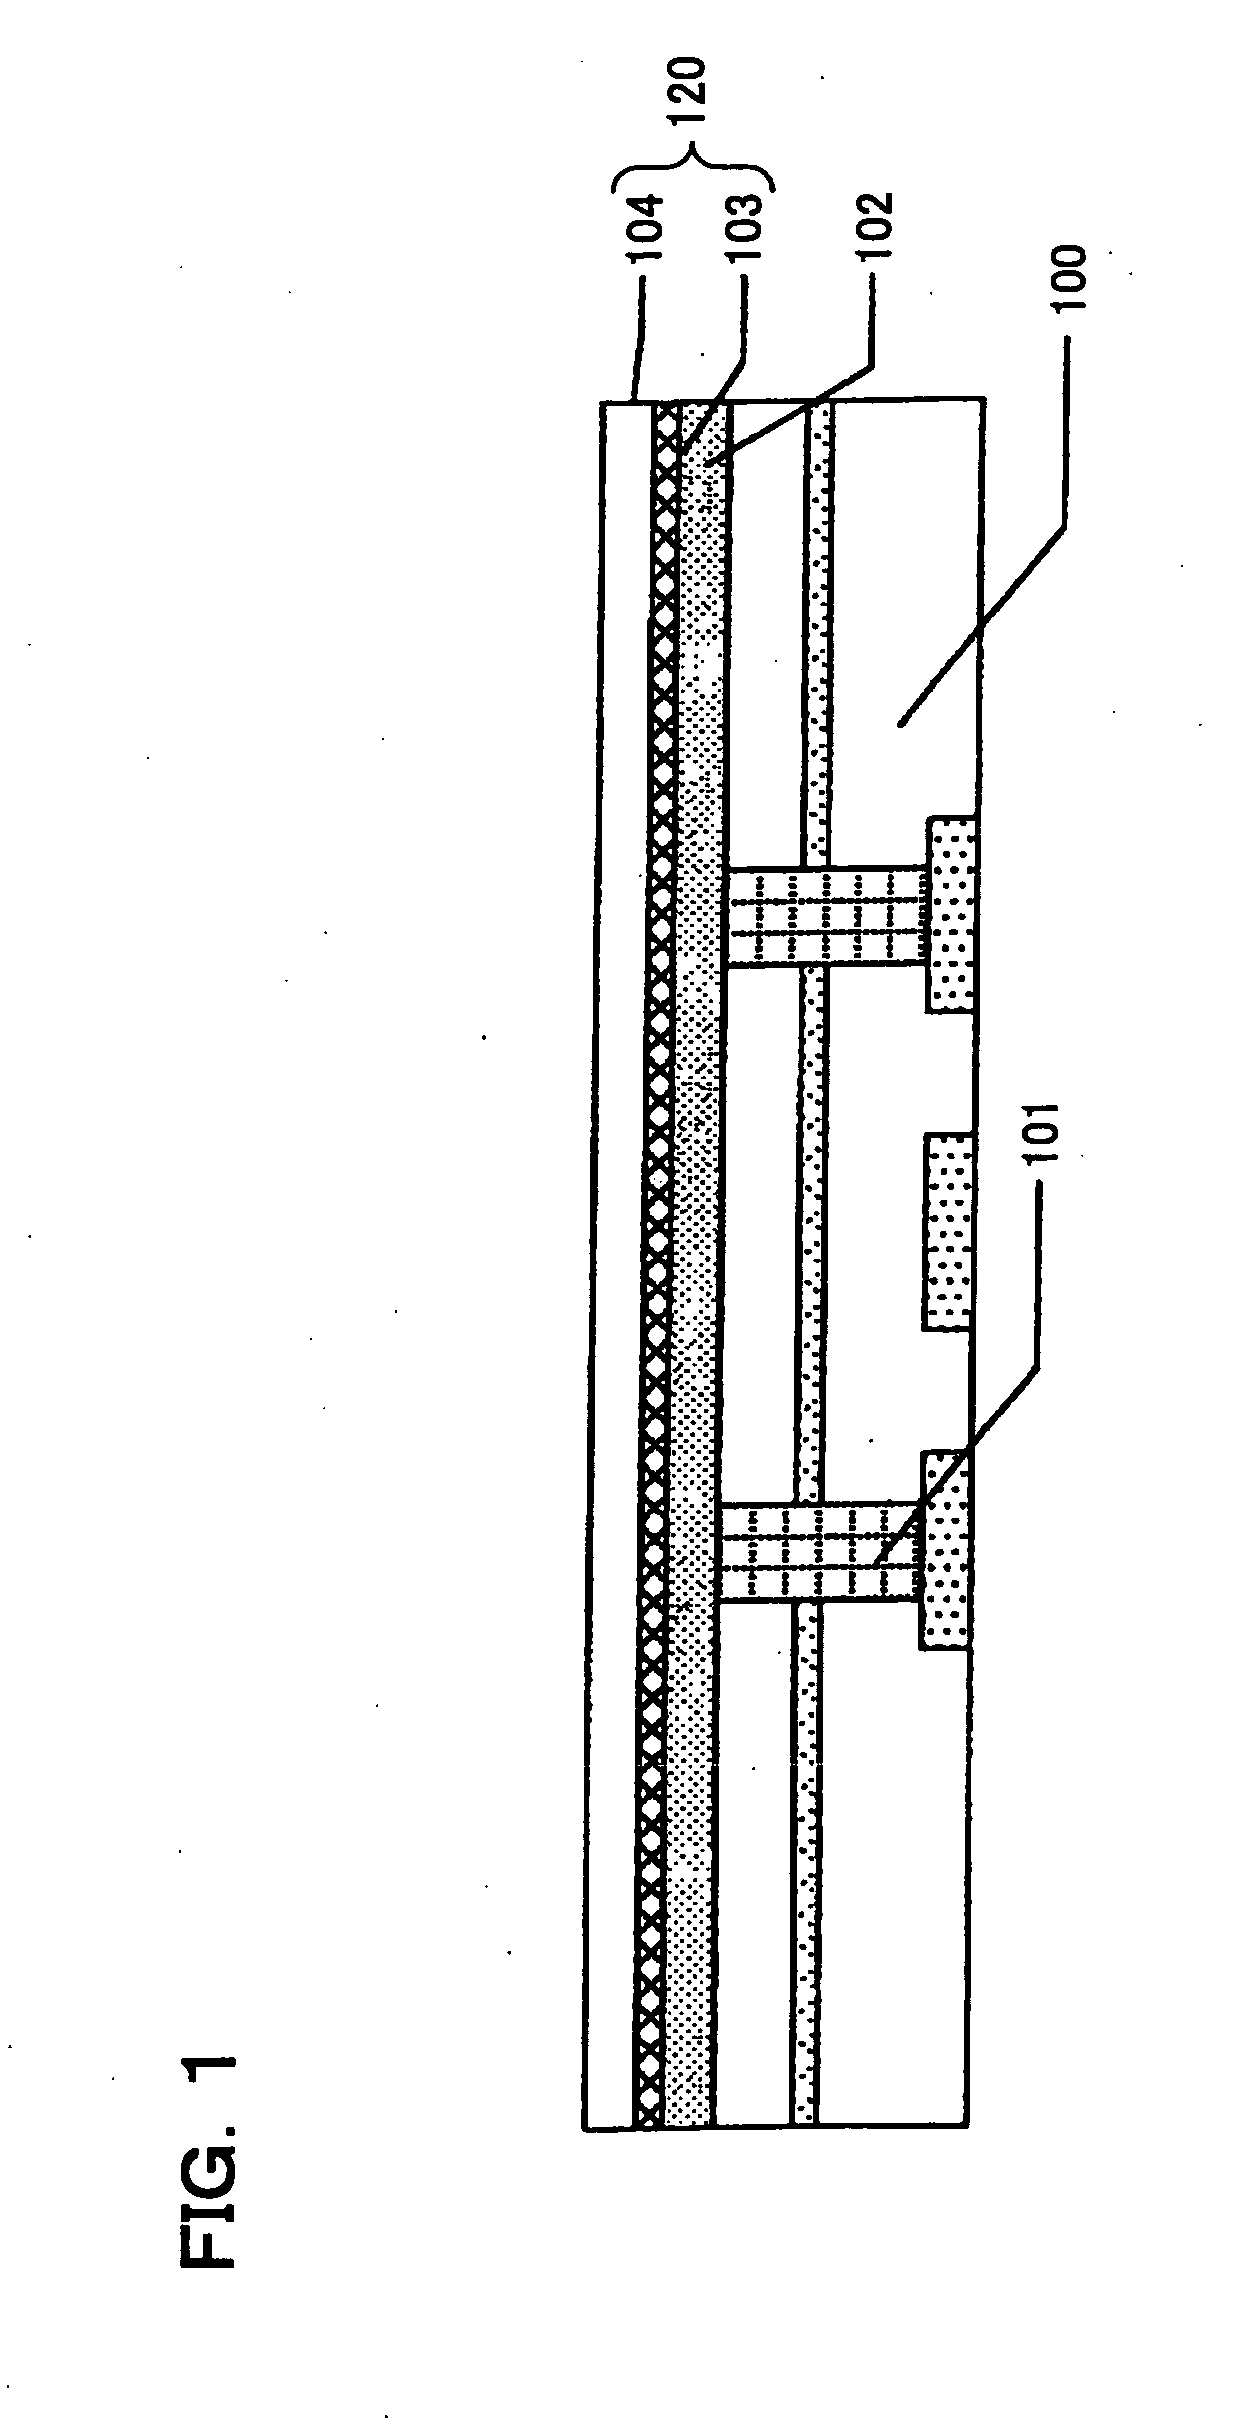 Ferroelectric memory device and method of manufacturing the same